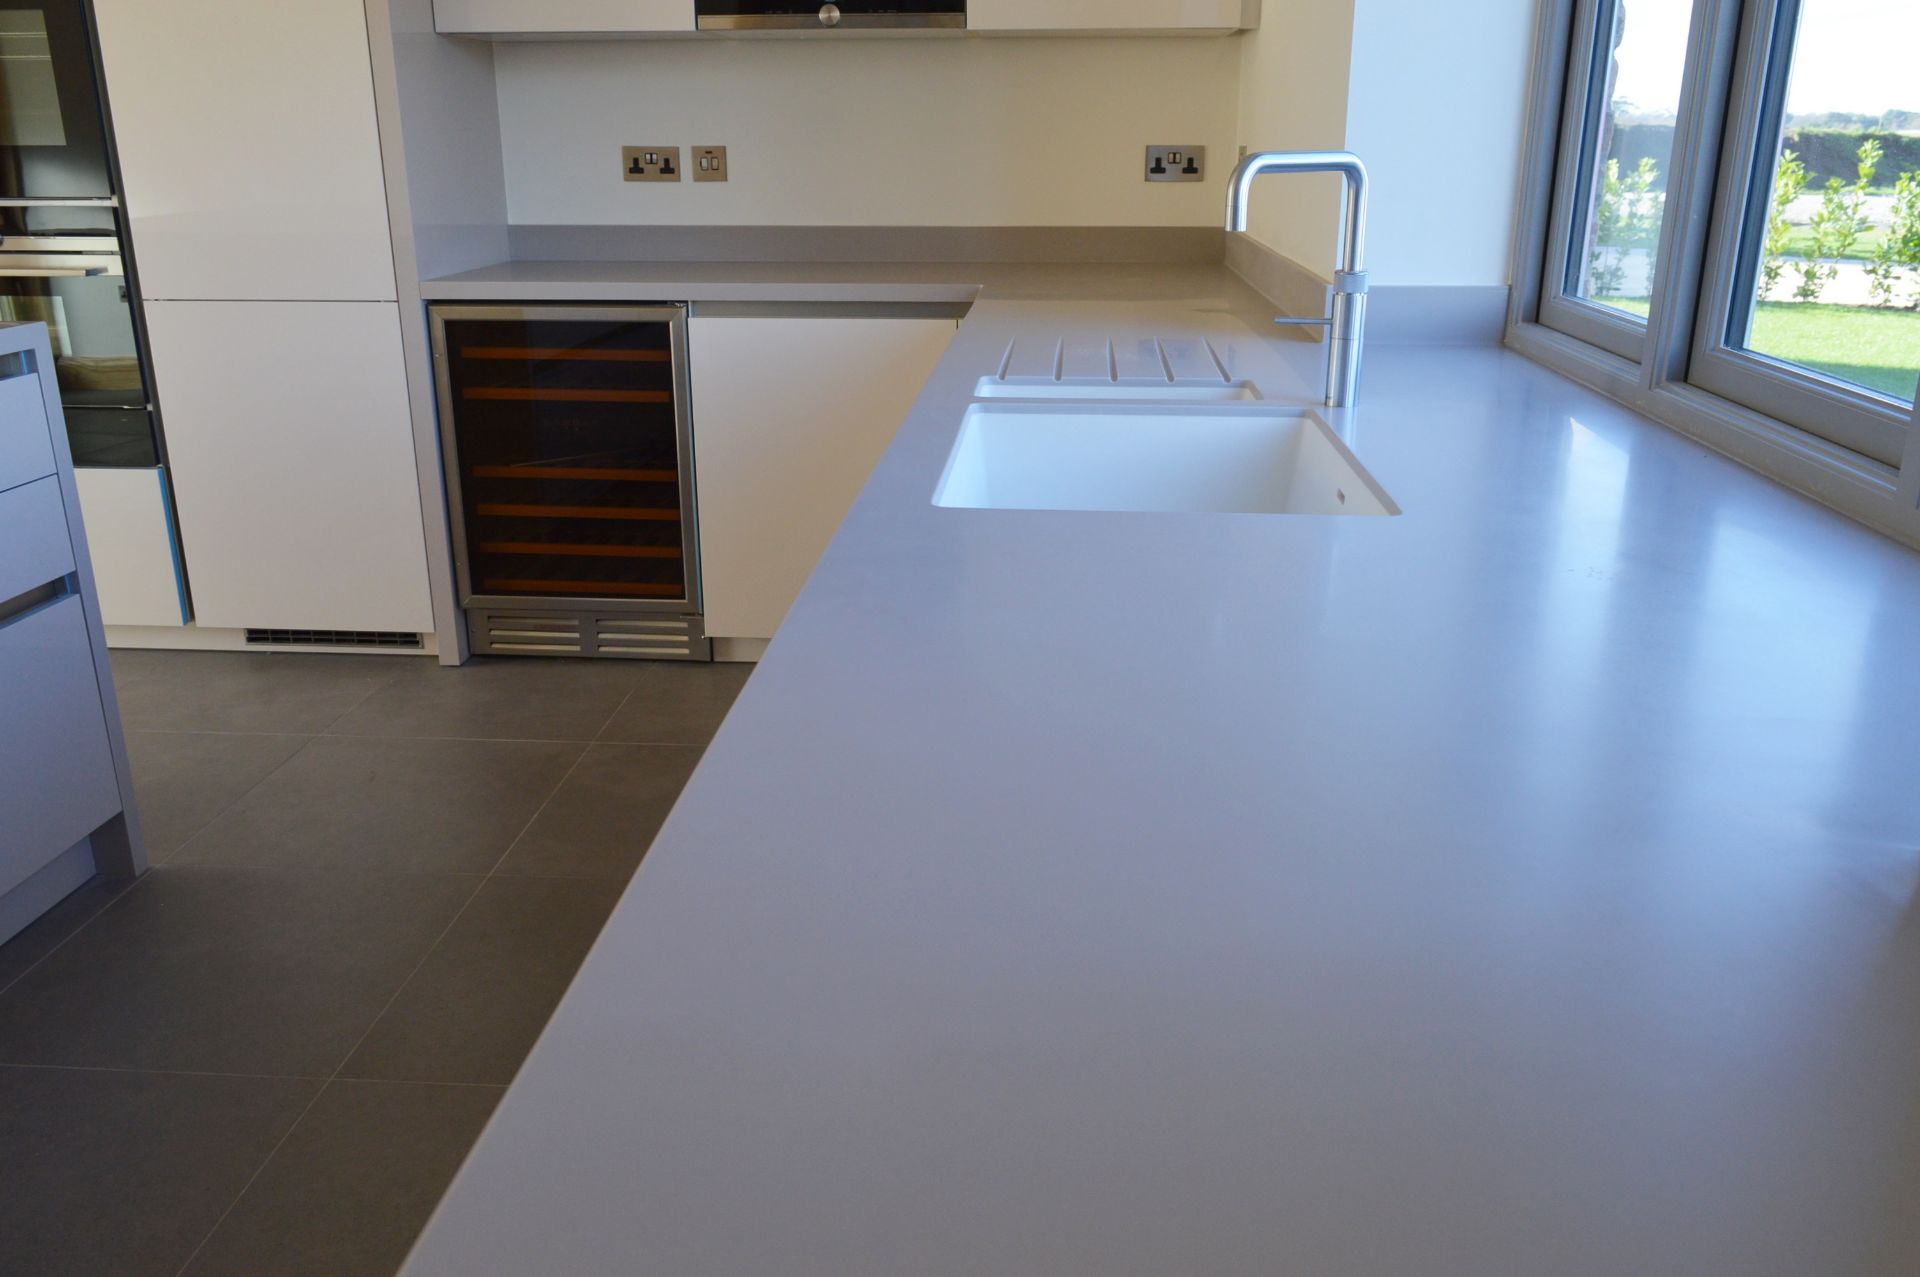 1 x Stunning KELLER Handleless FITTED KITCHEN With Corian Clay Worktops, Centre Island With - Image 61 of 104